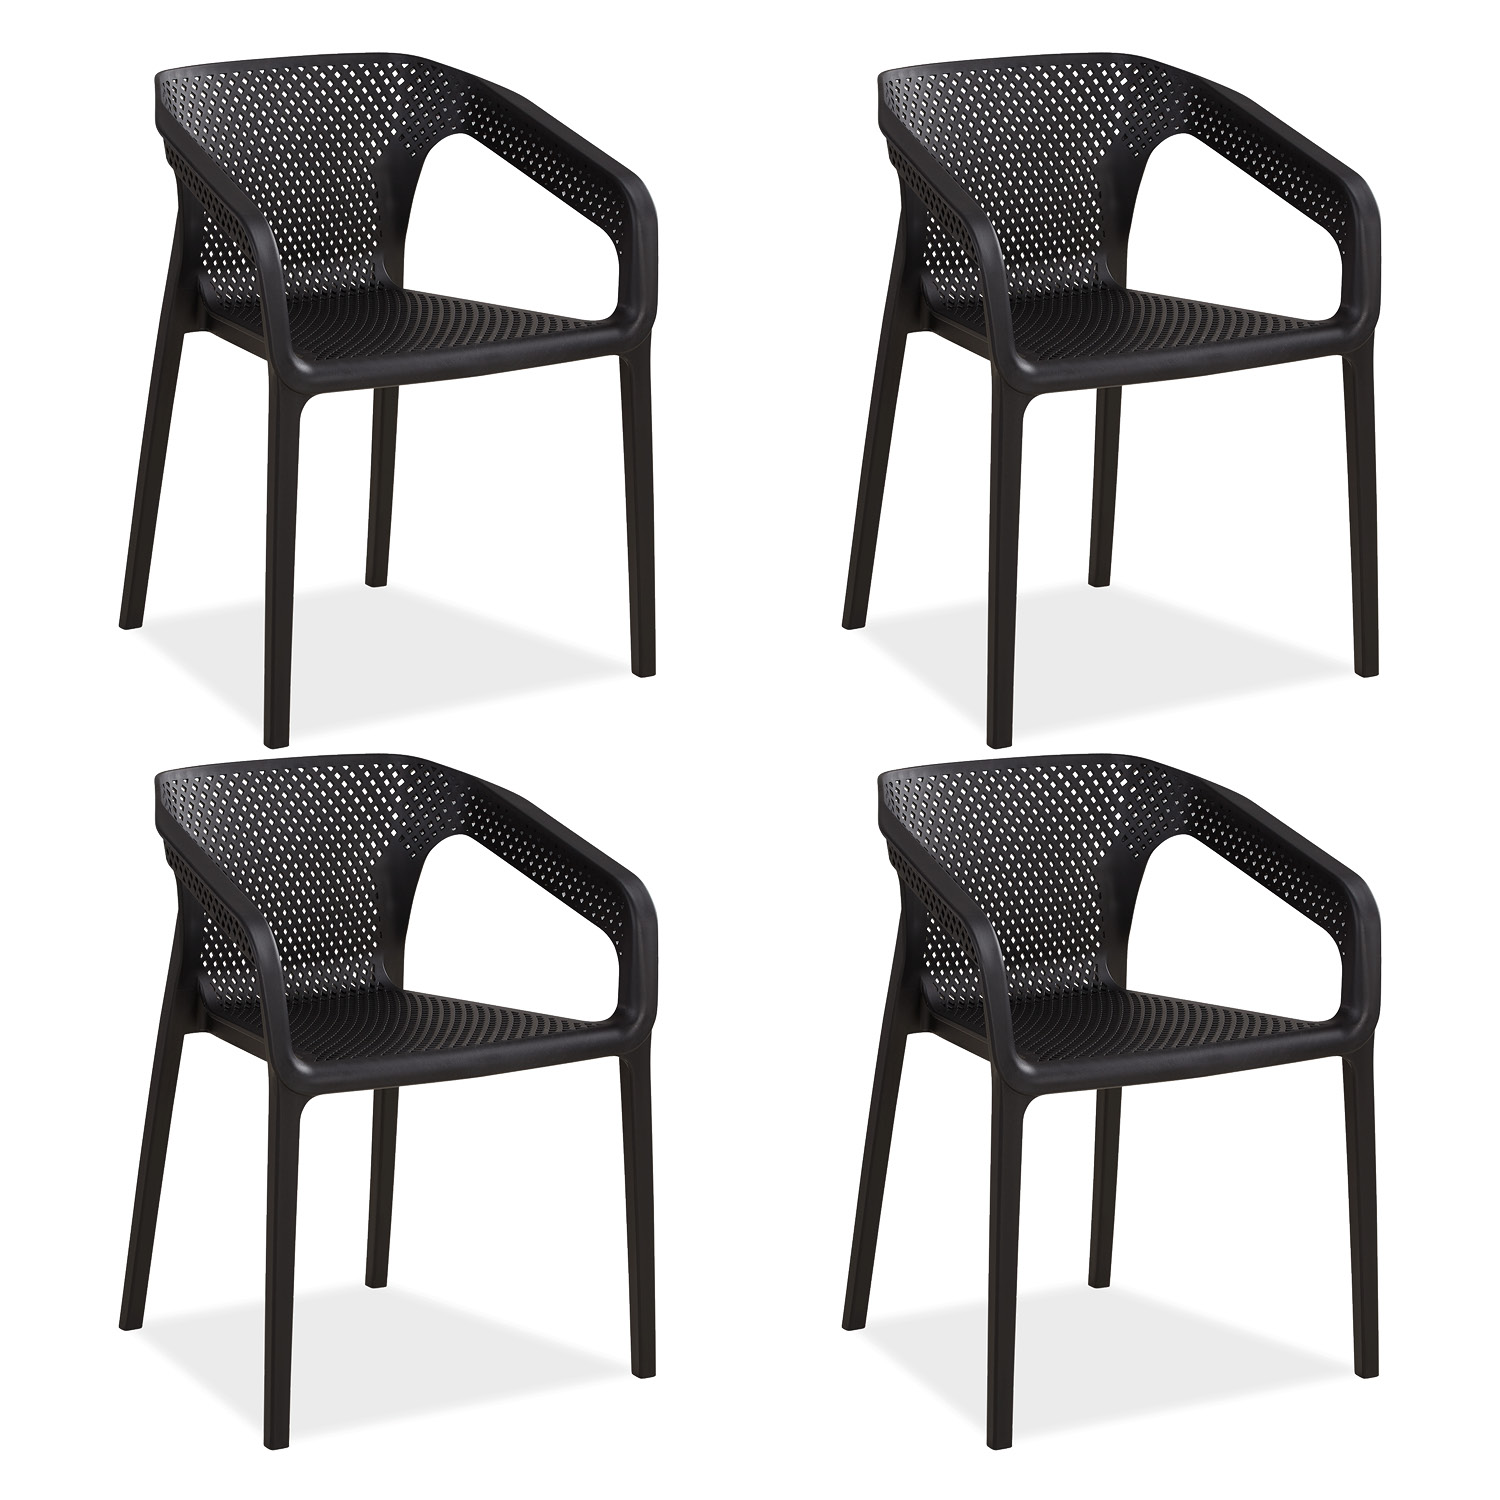 Set of 4 Garden chair with armrests Camping chairs Black Outdoor chairs Plastic Egg chair Lounger chairs Stacking chairs